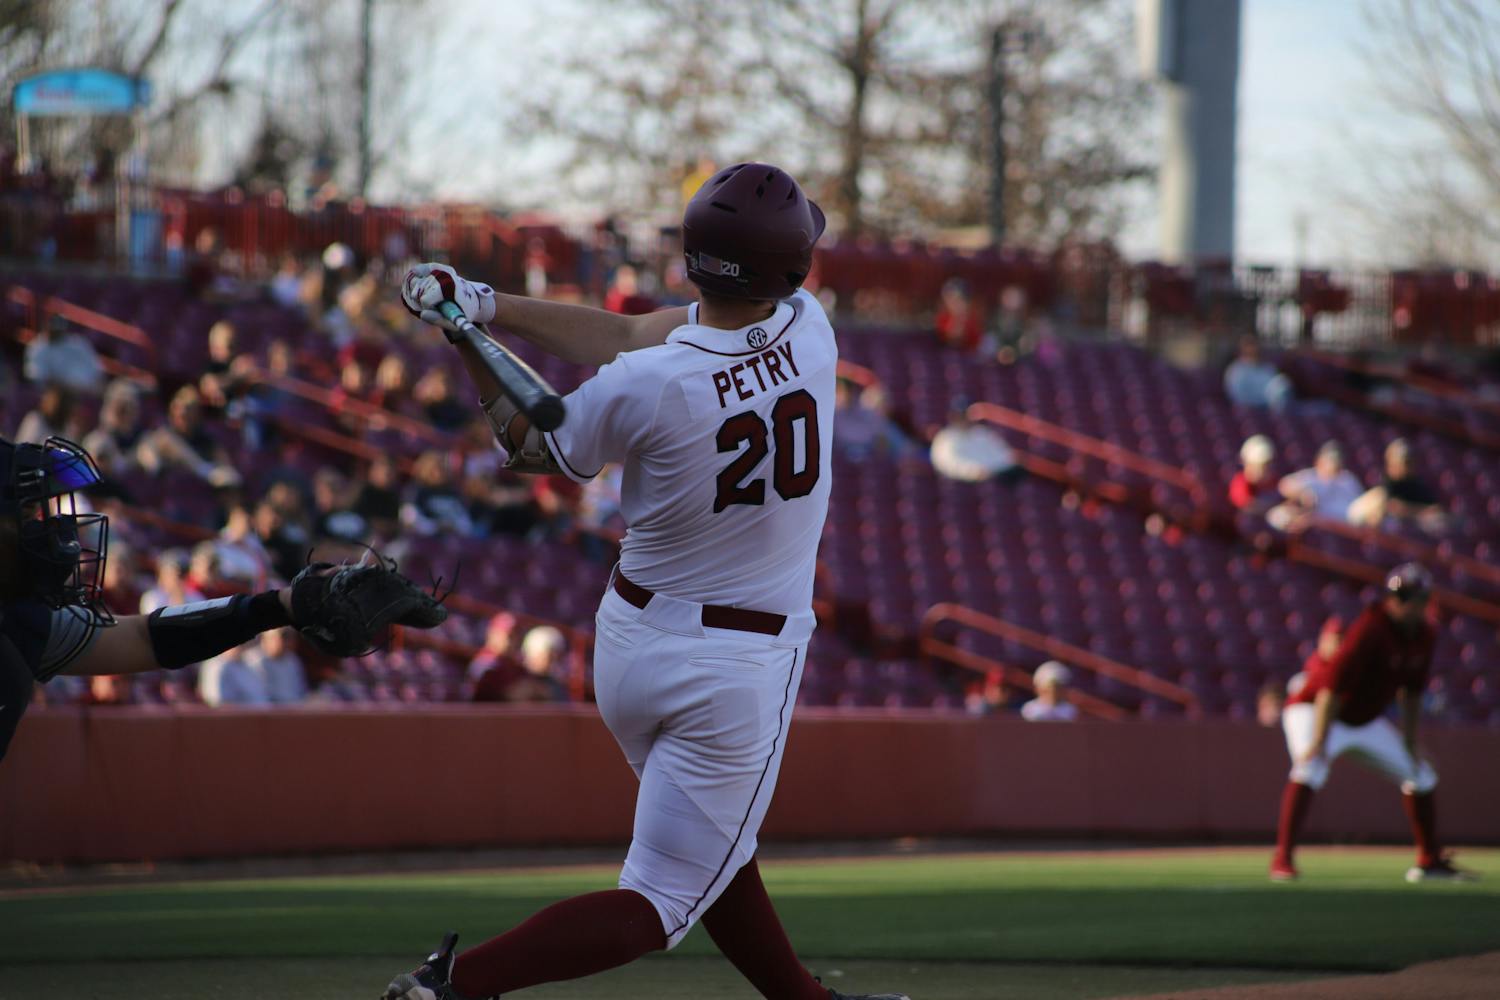 FILE—Freshman outfielder Ethan Petry up to bat for the South Carolina Gamecocks against Queens on Feb. 22. South Carolina secured its first shutout of the season with a 12-0 win, making this its fifth game in a row with double-digits scoring.